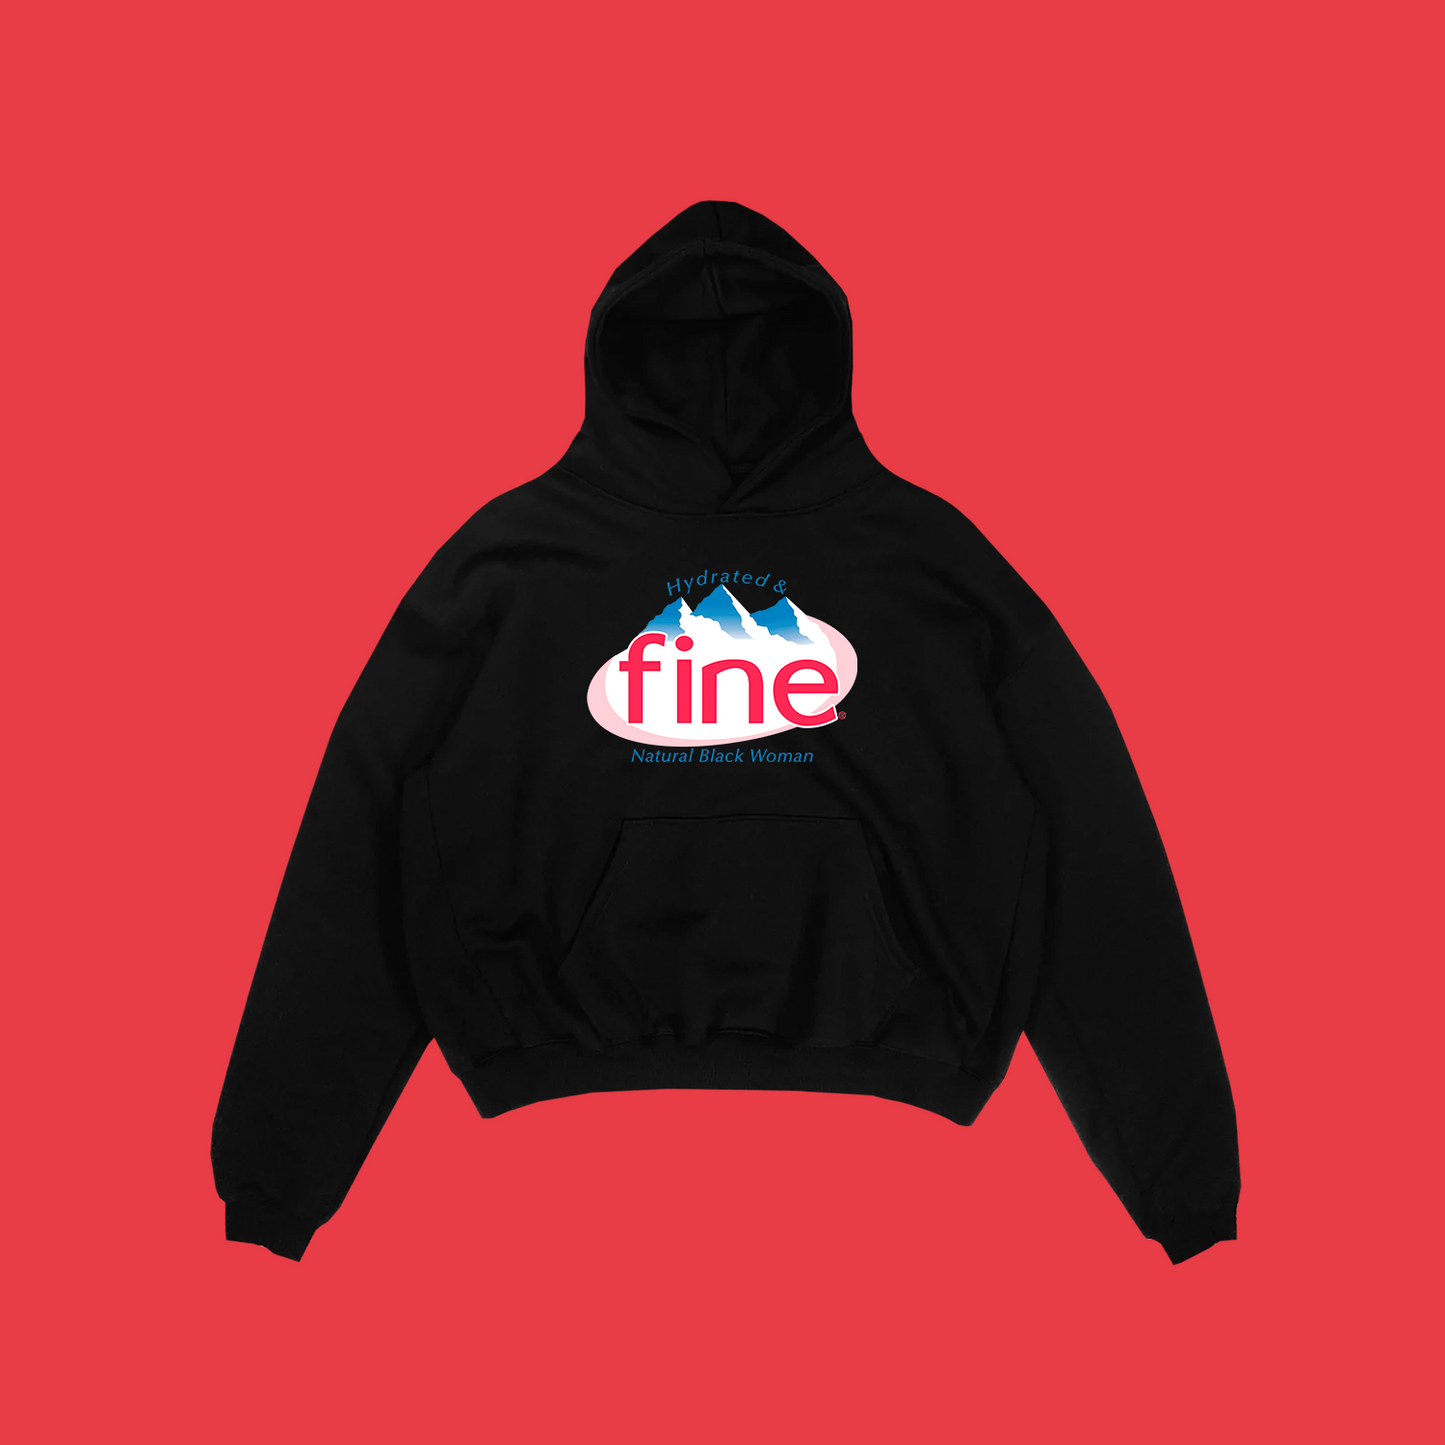 hydrated and Fine hoodie